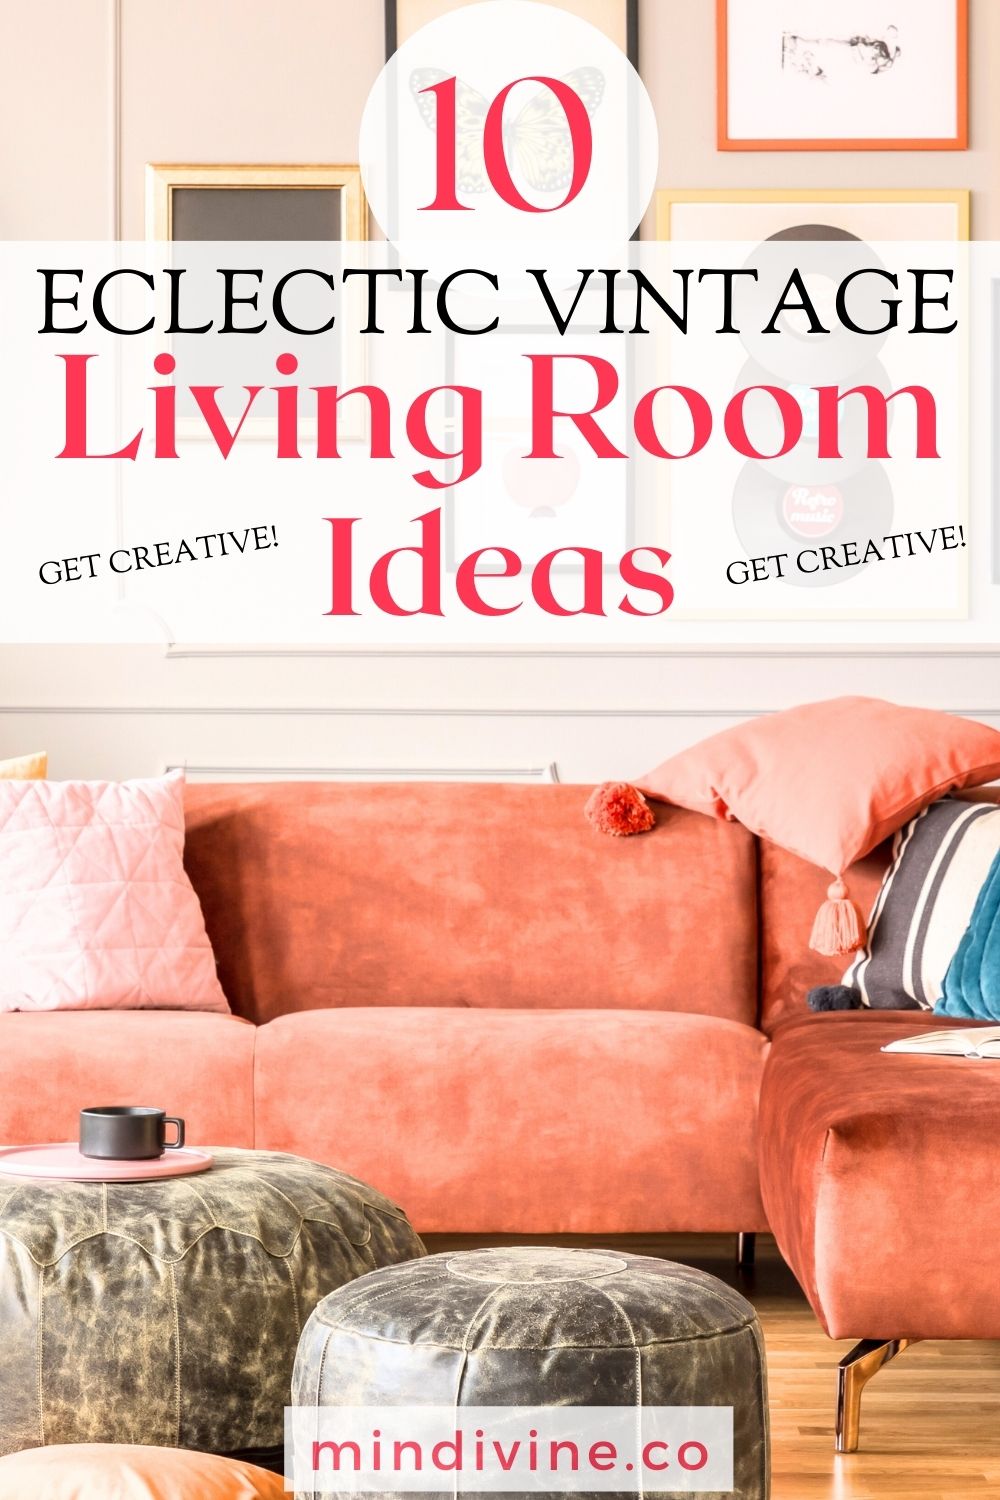 Eclectic vintage living room